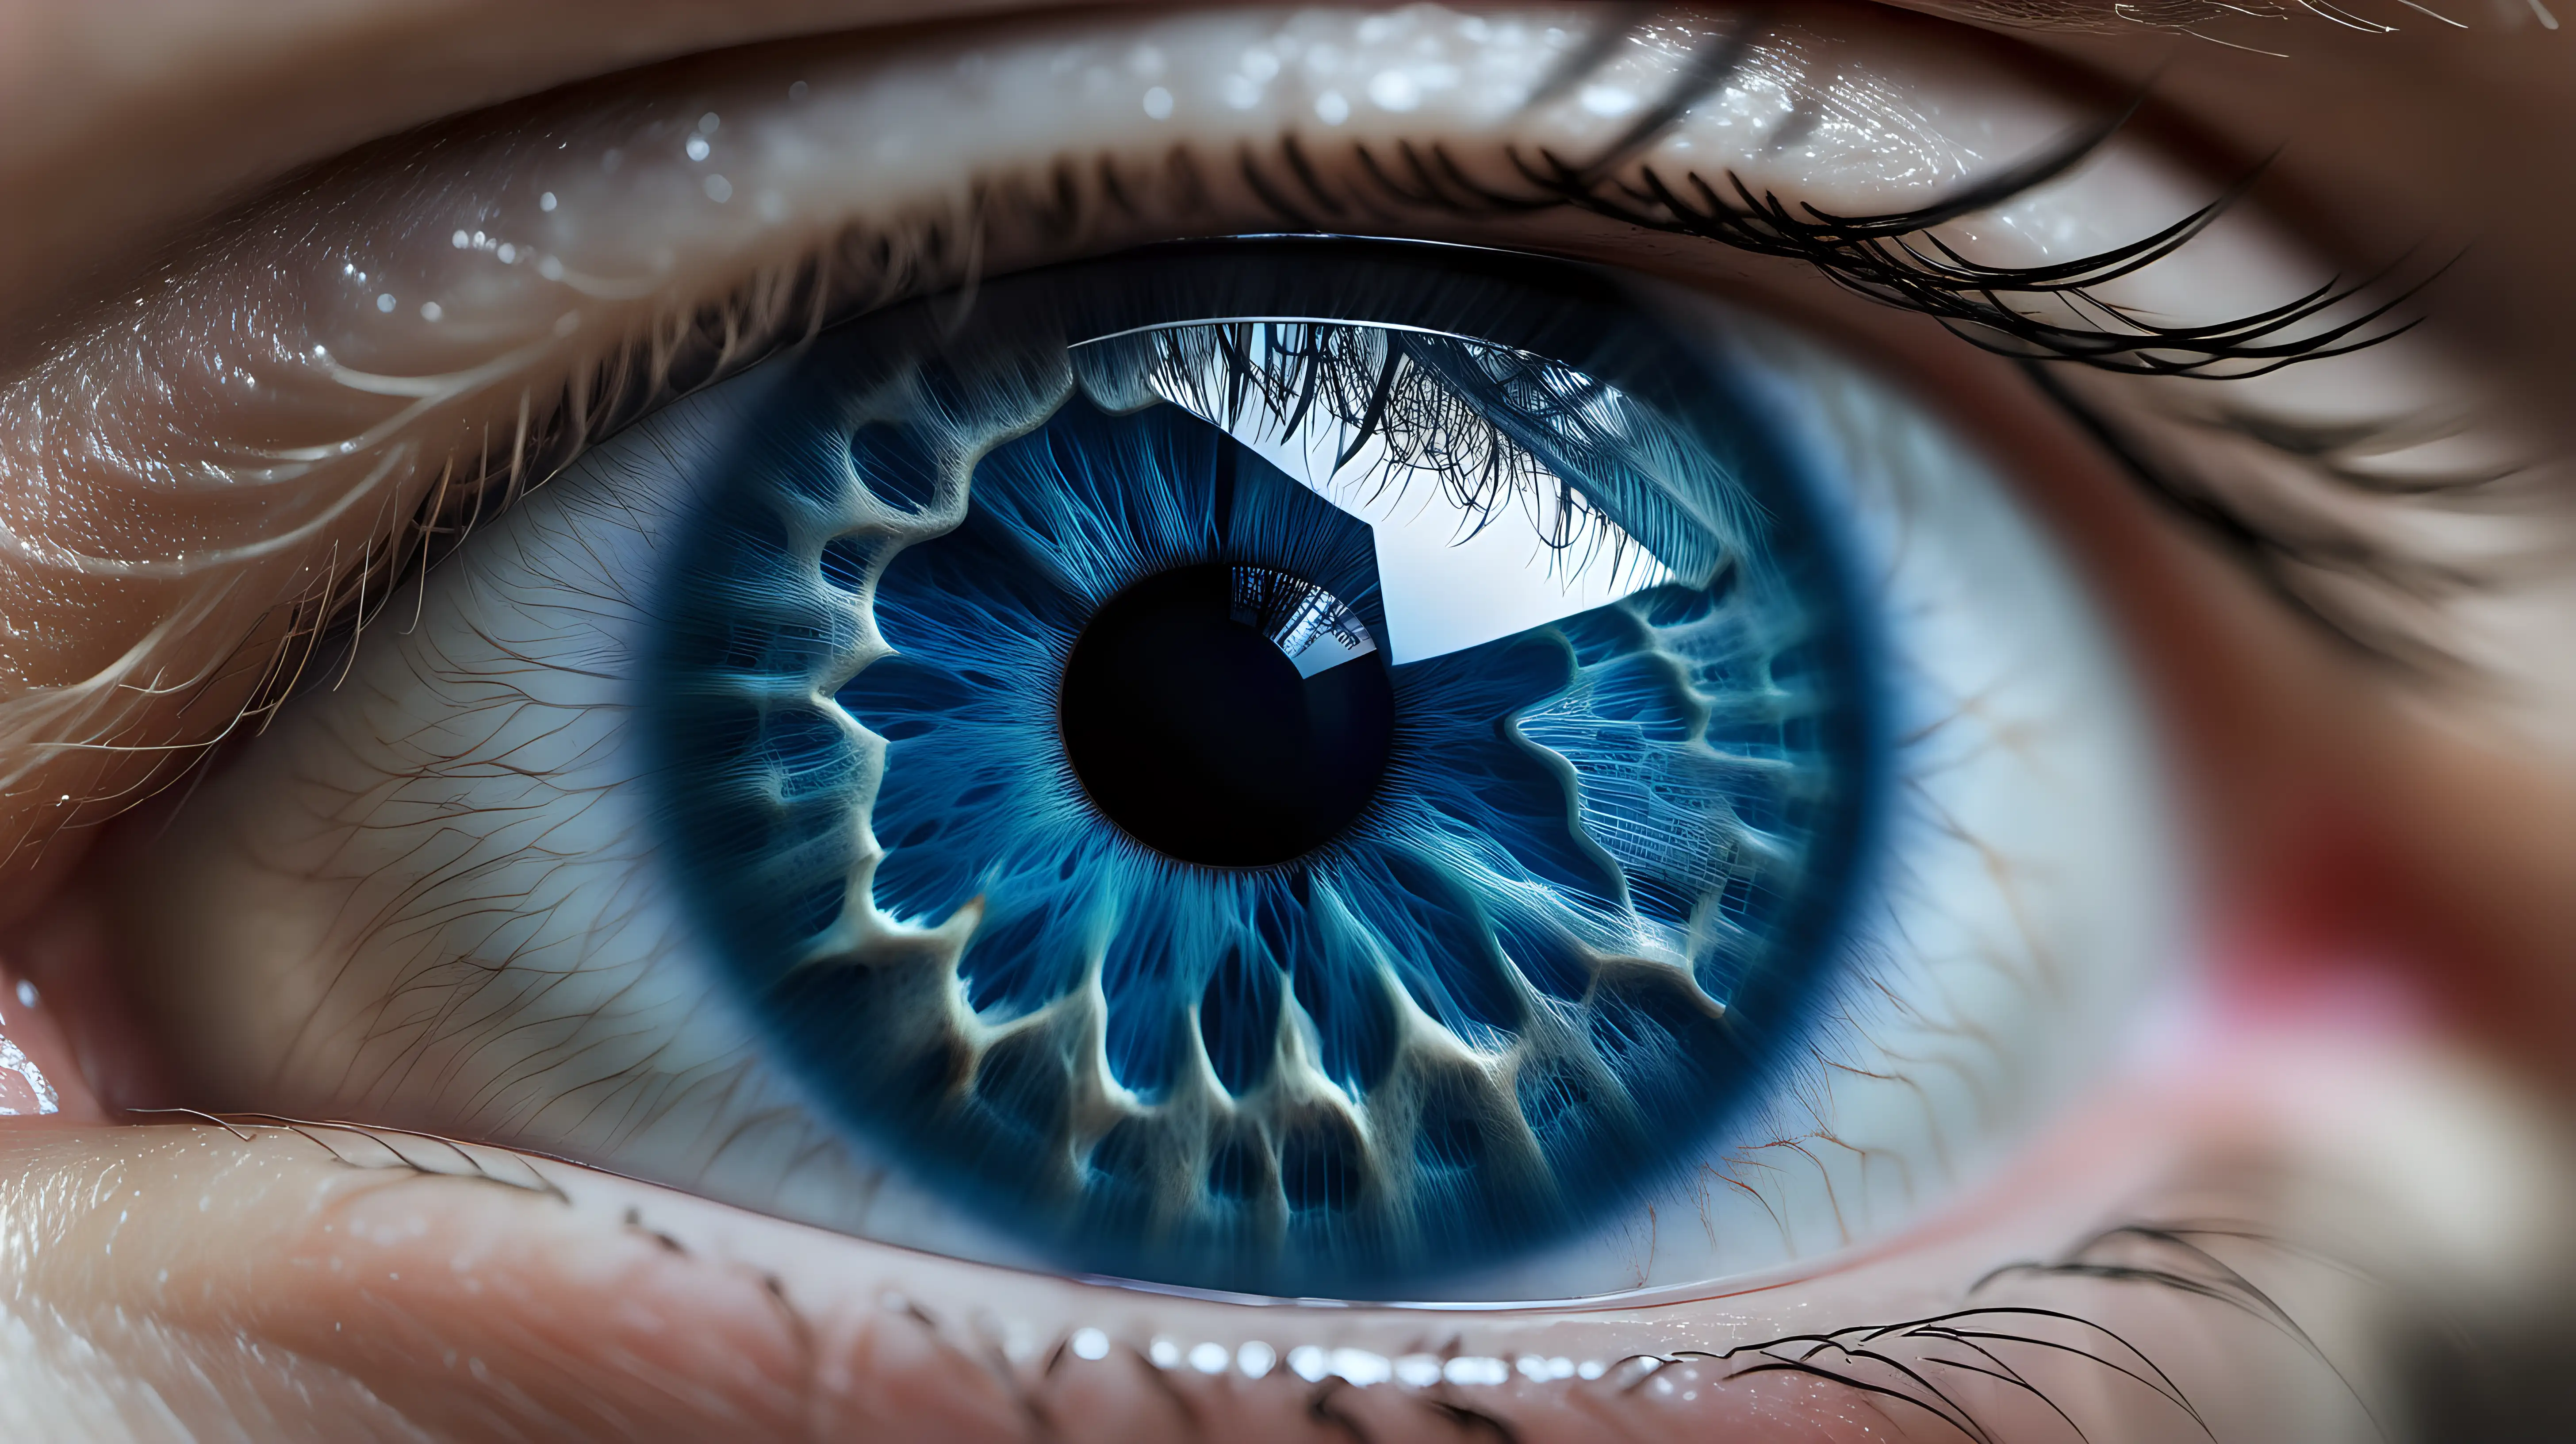 A close-up of a blue eye filling the entire screen. Highly detailed, photographic quality.